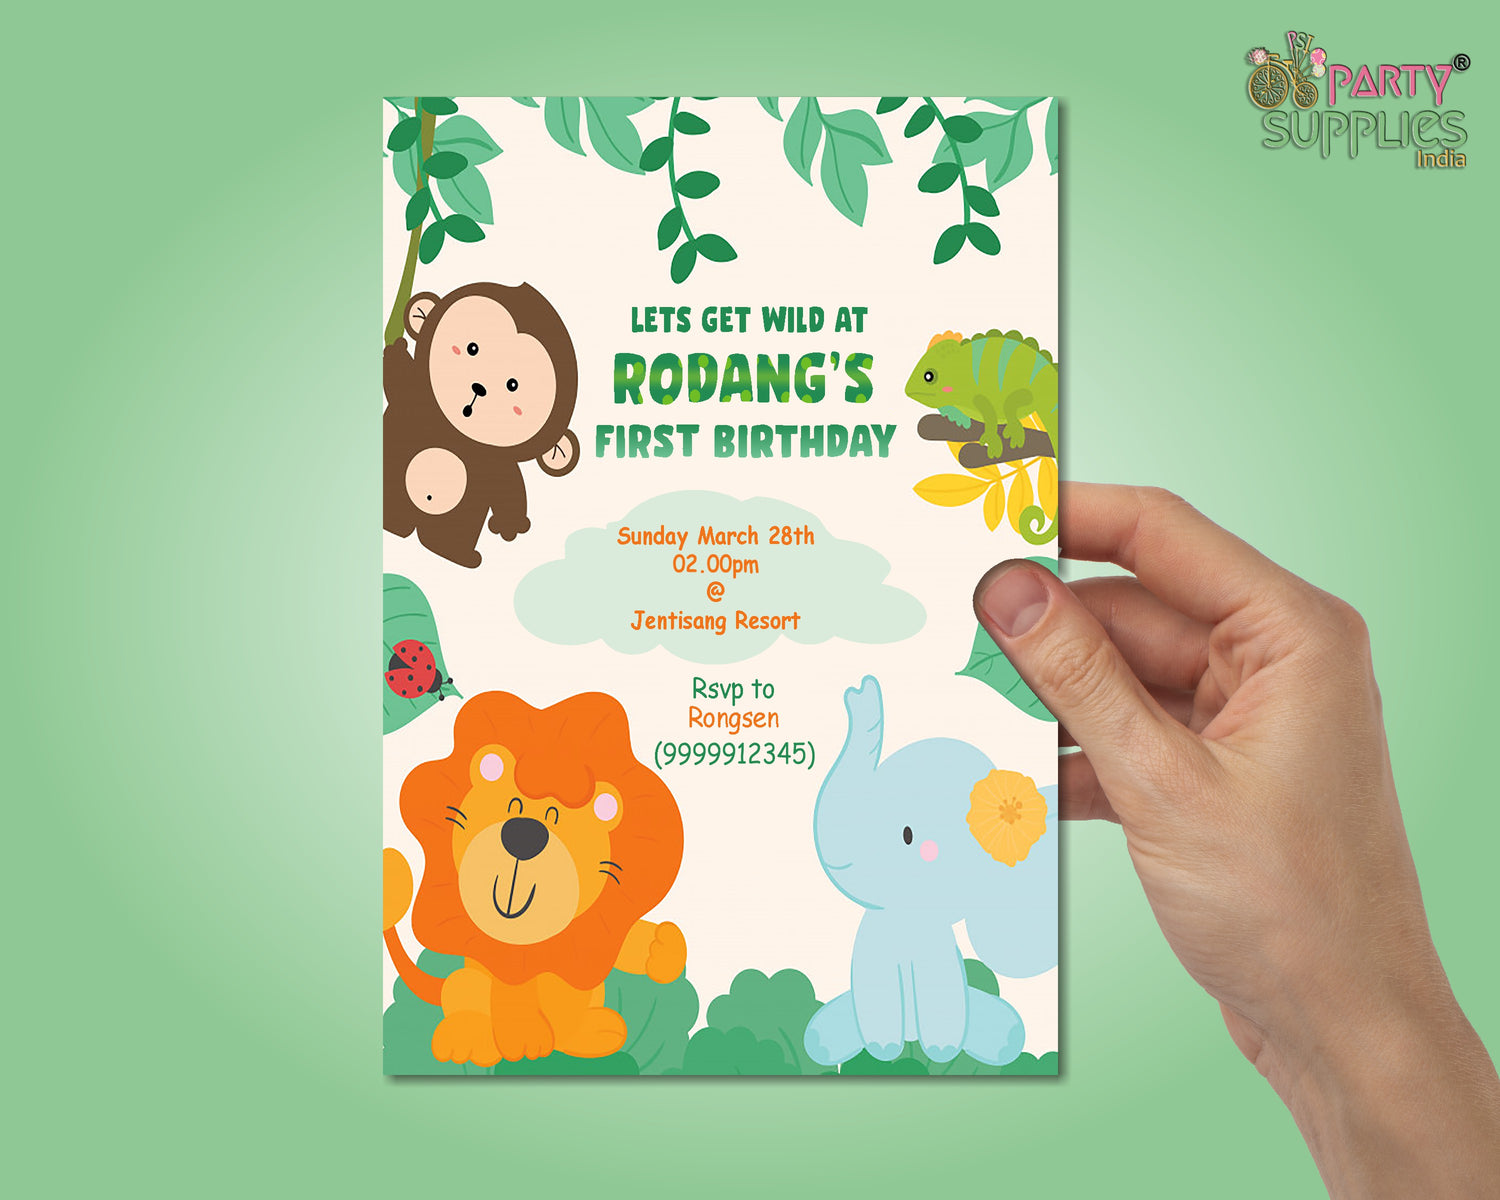 Jungle Theme Customized with Baby Details Invite